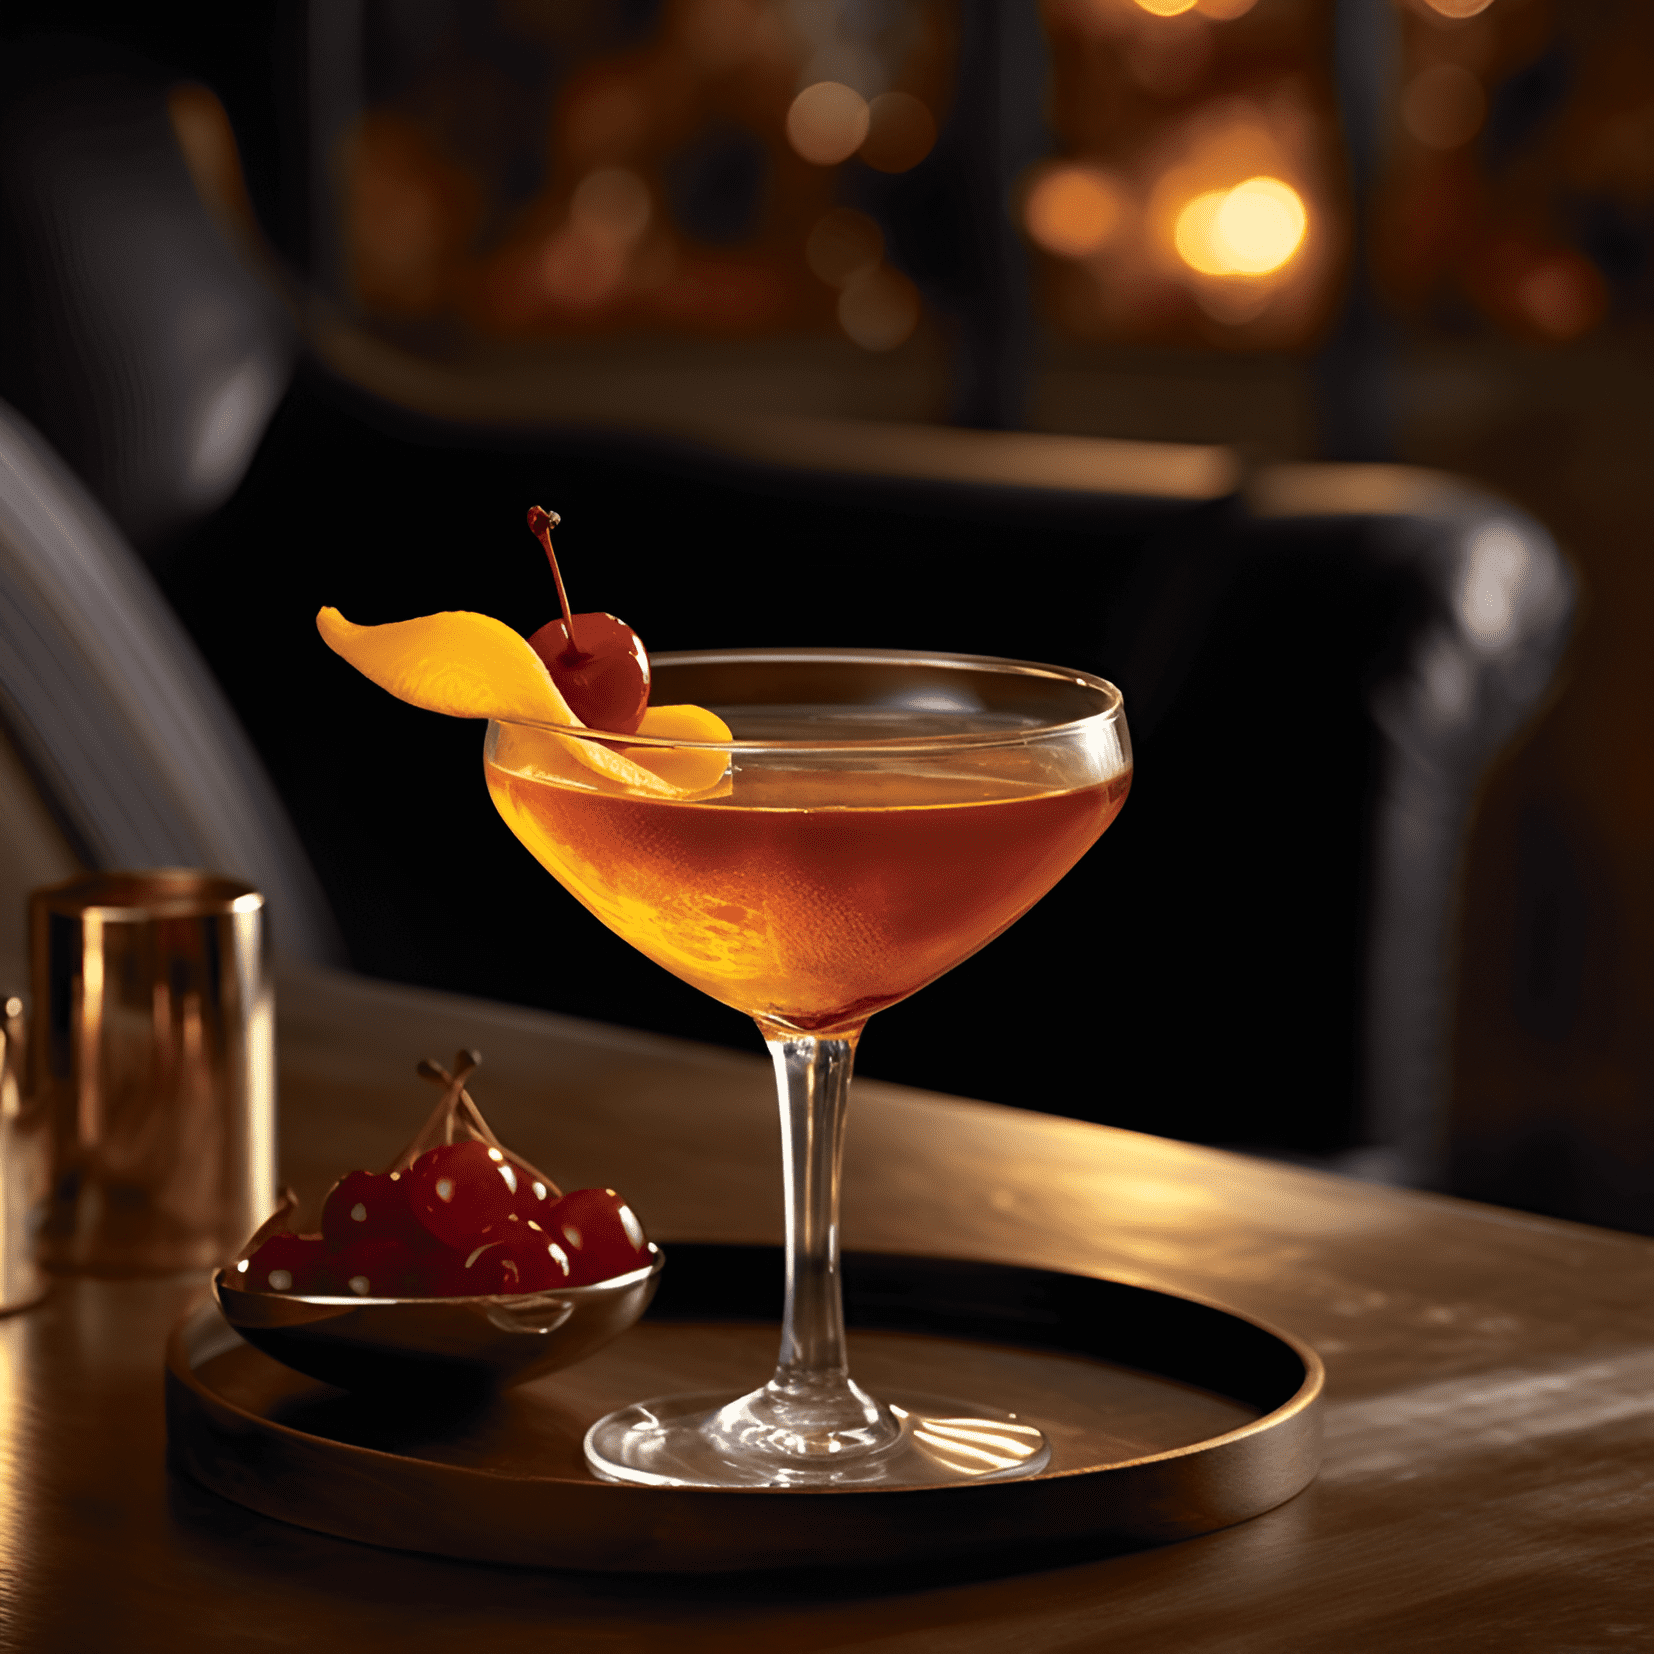 The Lone Tree cocktail is a well-balanced mix of sweet, sour, and bitter flavors. It has a smooth, velvety texture with a hint of citrus and herbal notes. The drink is medium-bodied, with a pleasant warmth from the alcohol and a lingering, slightly bitter aftertaste.